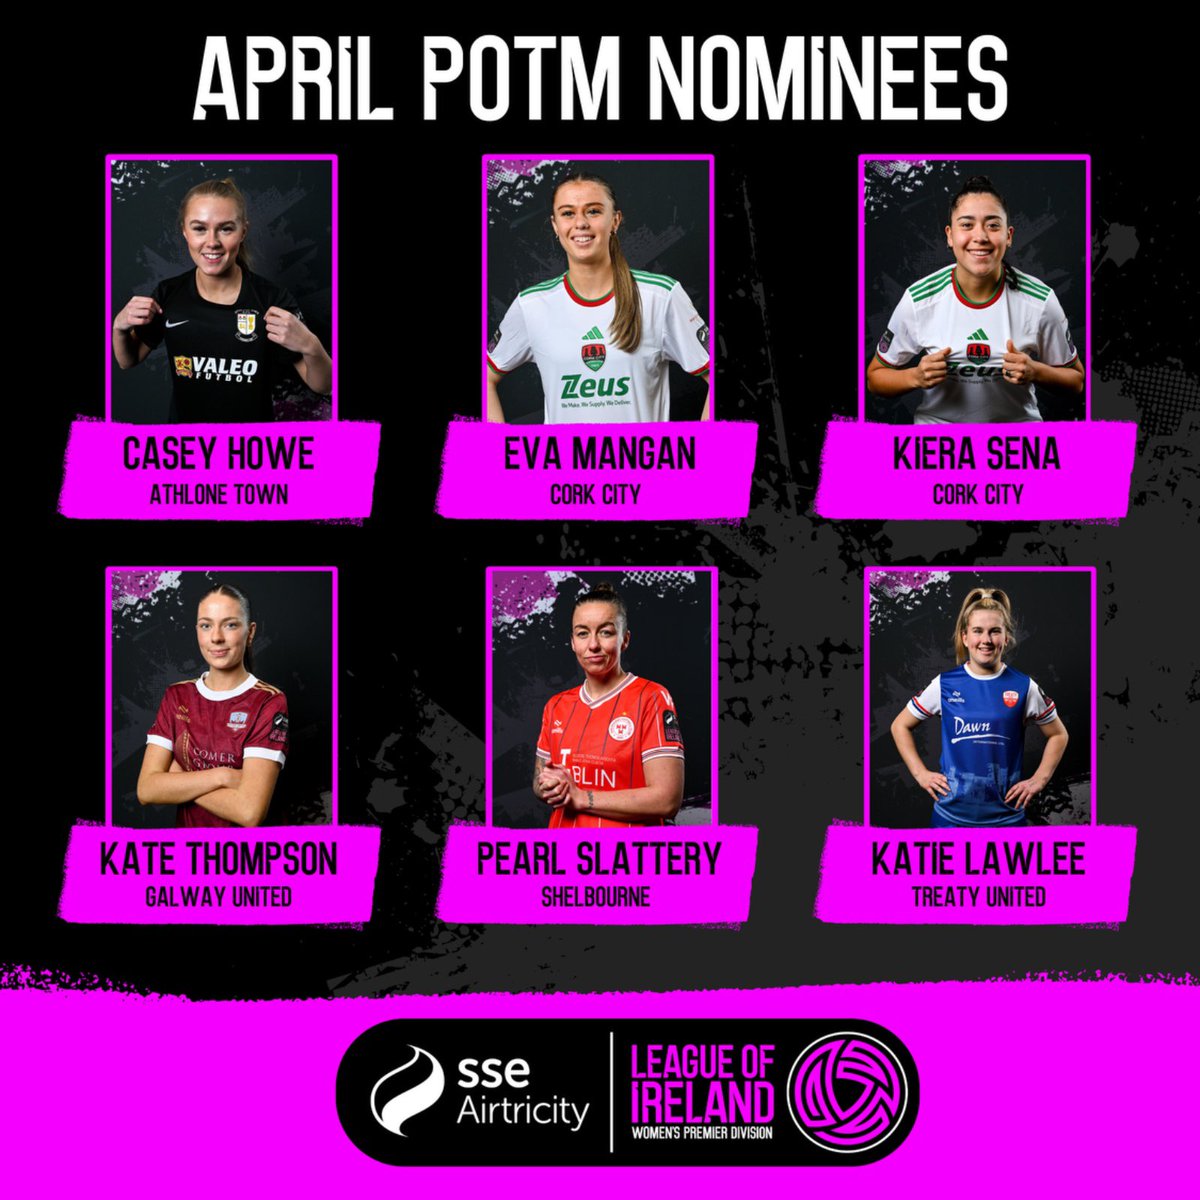 Player of the Month nominations for April! 👏 Who are you rooting for? #WLOI | #LOITV